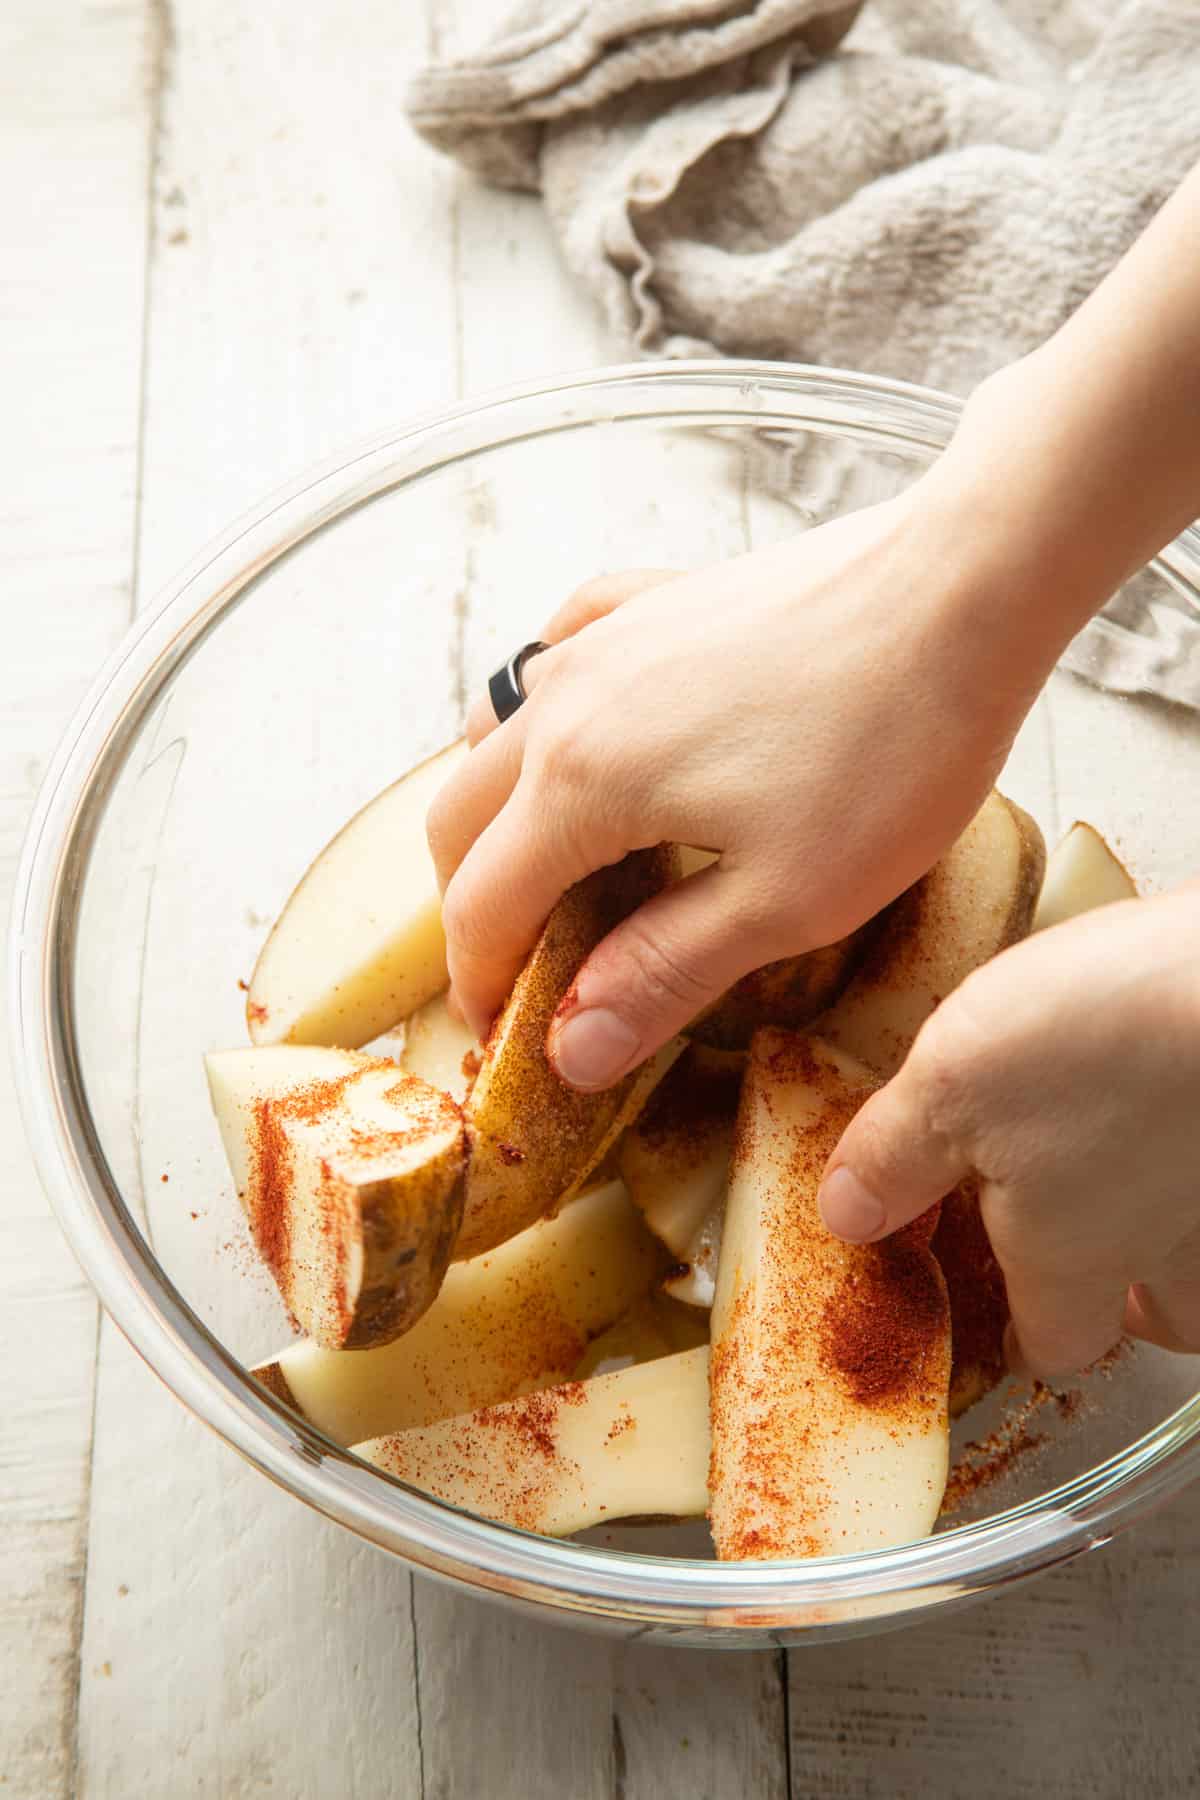 Hands rubbing spices and oil into cut potatoes in a glass bowl.